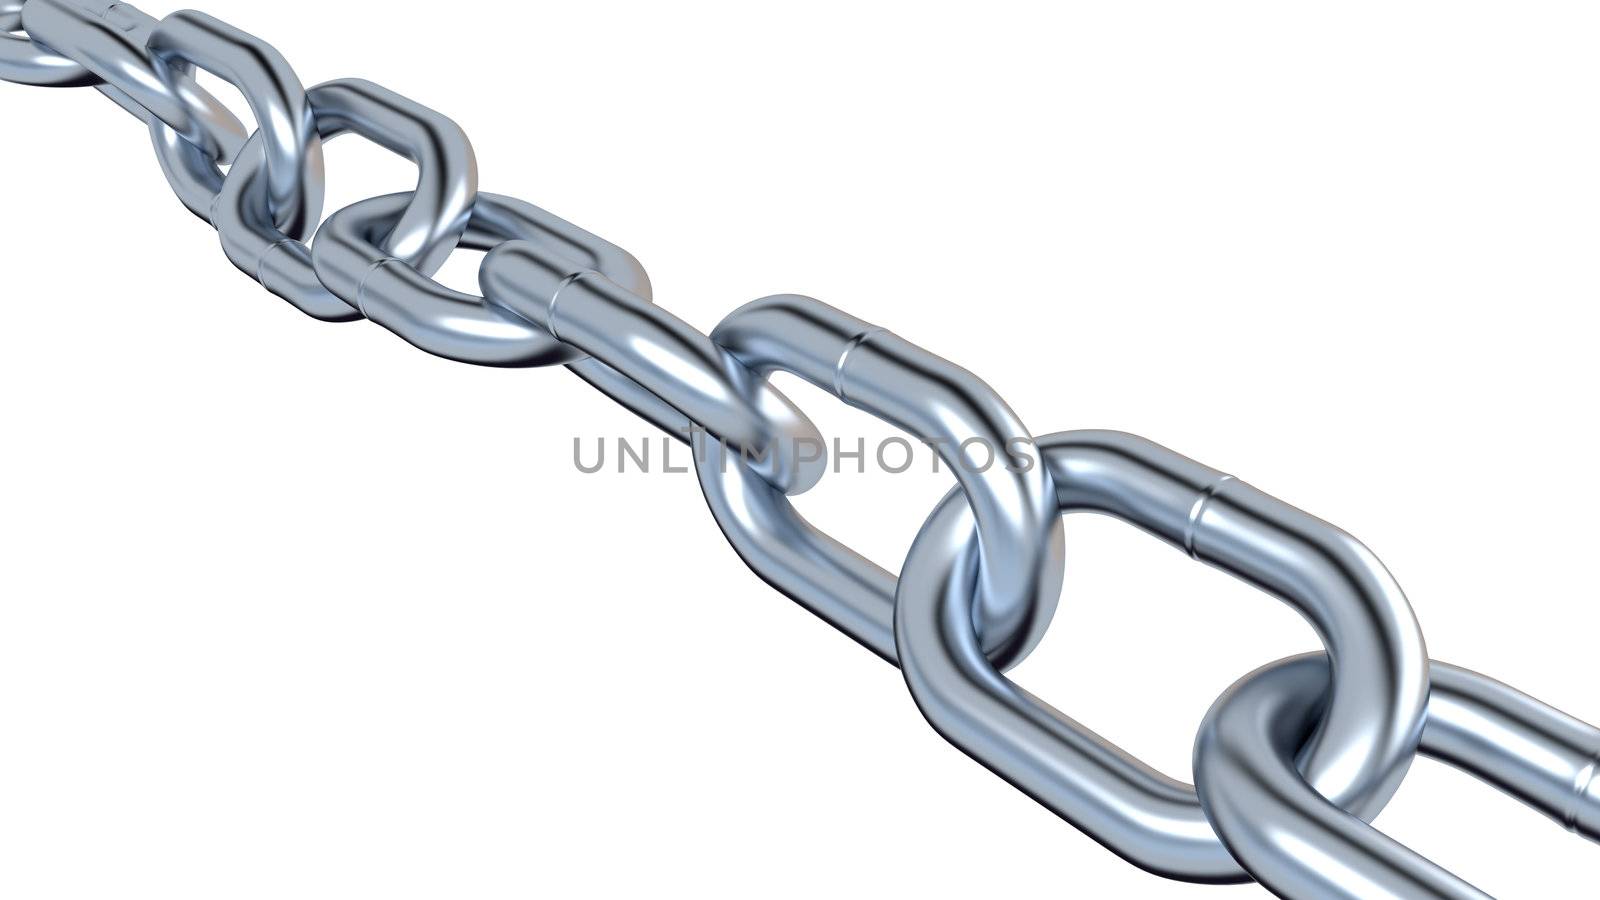 One Metallic Chain with a White Background